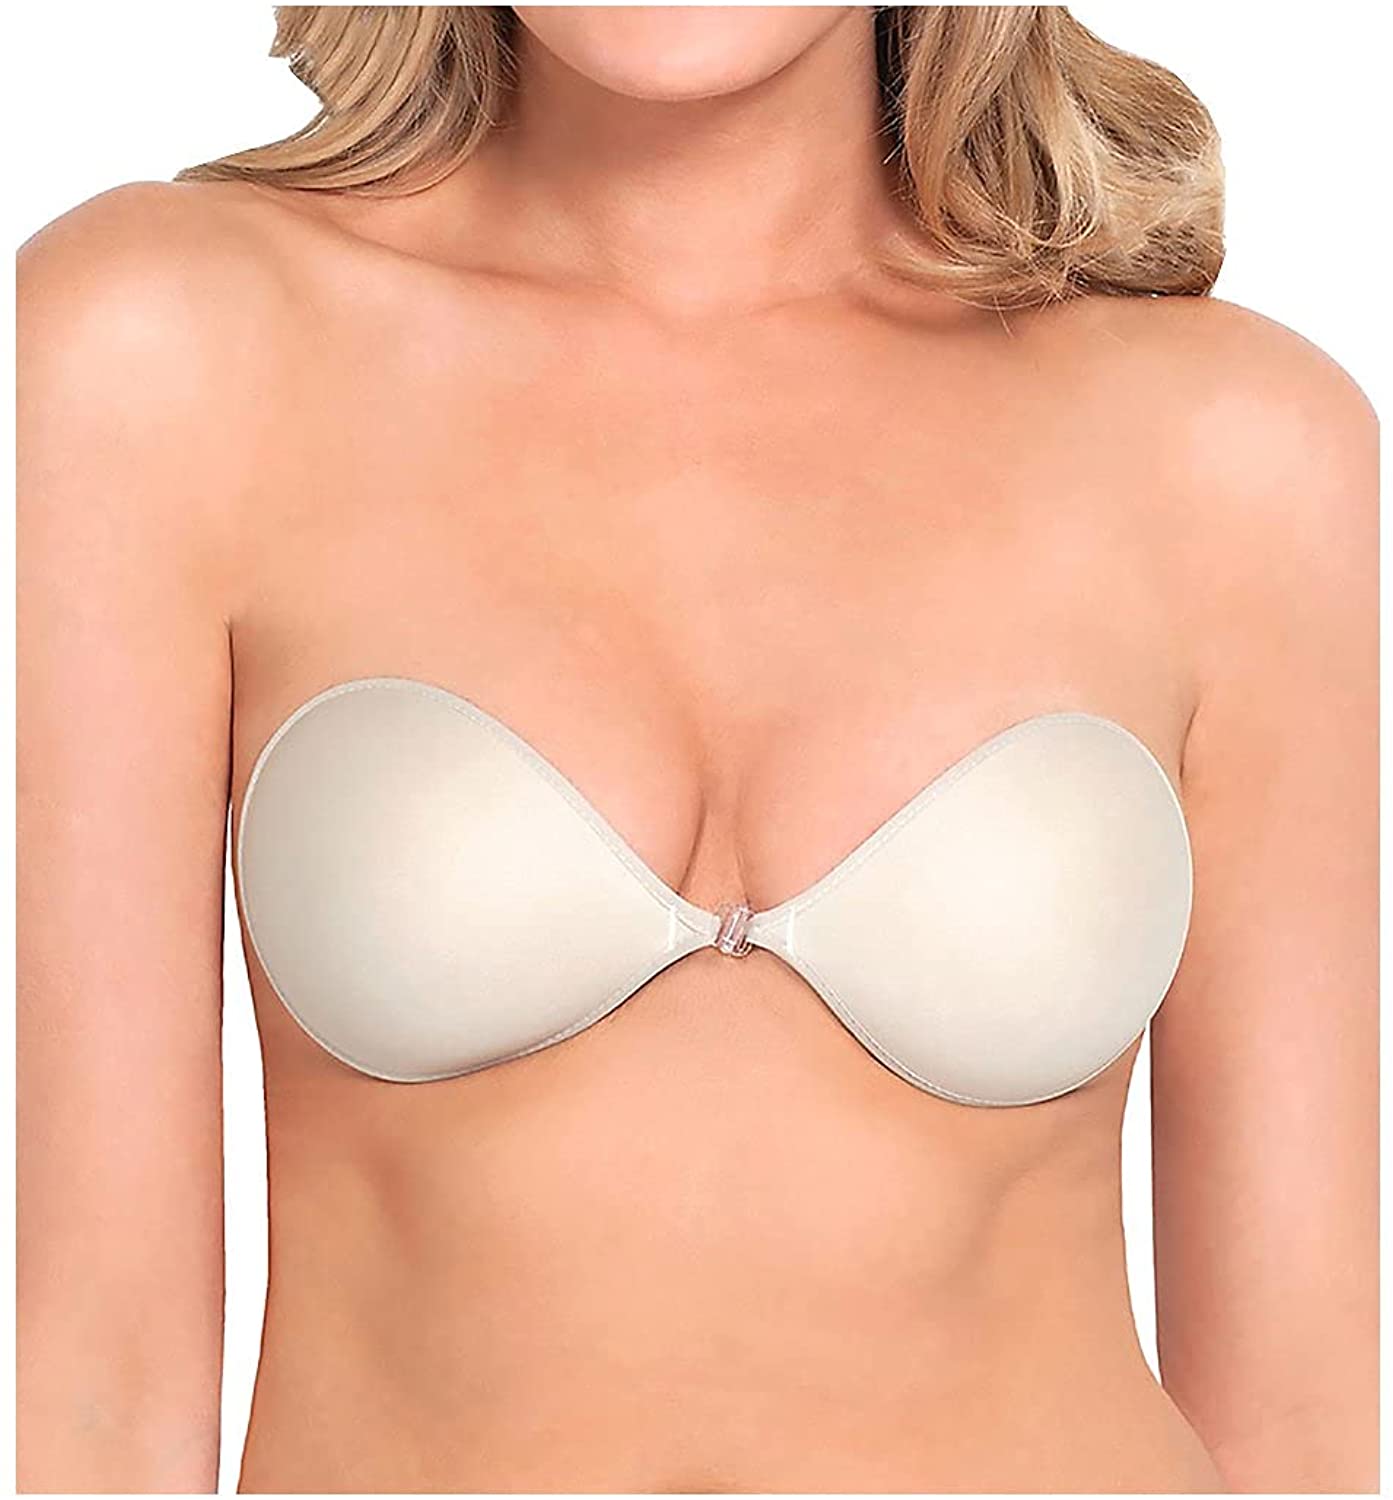 Best Backless Bra for Small Busts: Fashion Forms - Nubra Ultralite Bra